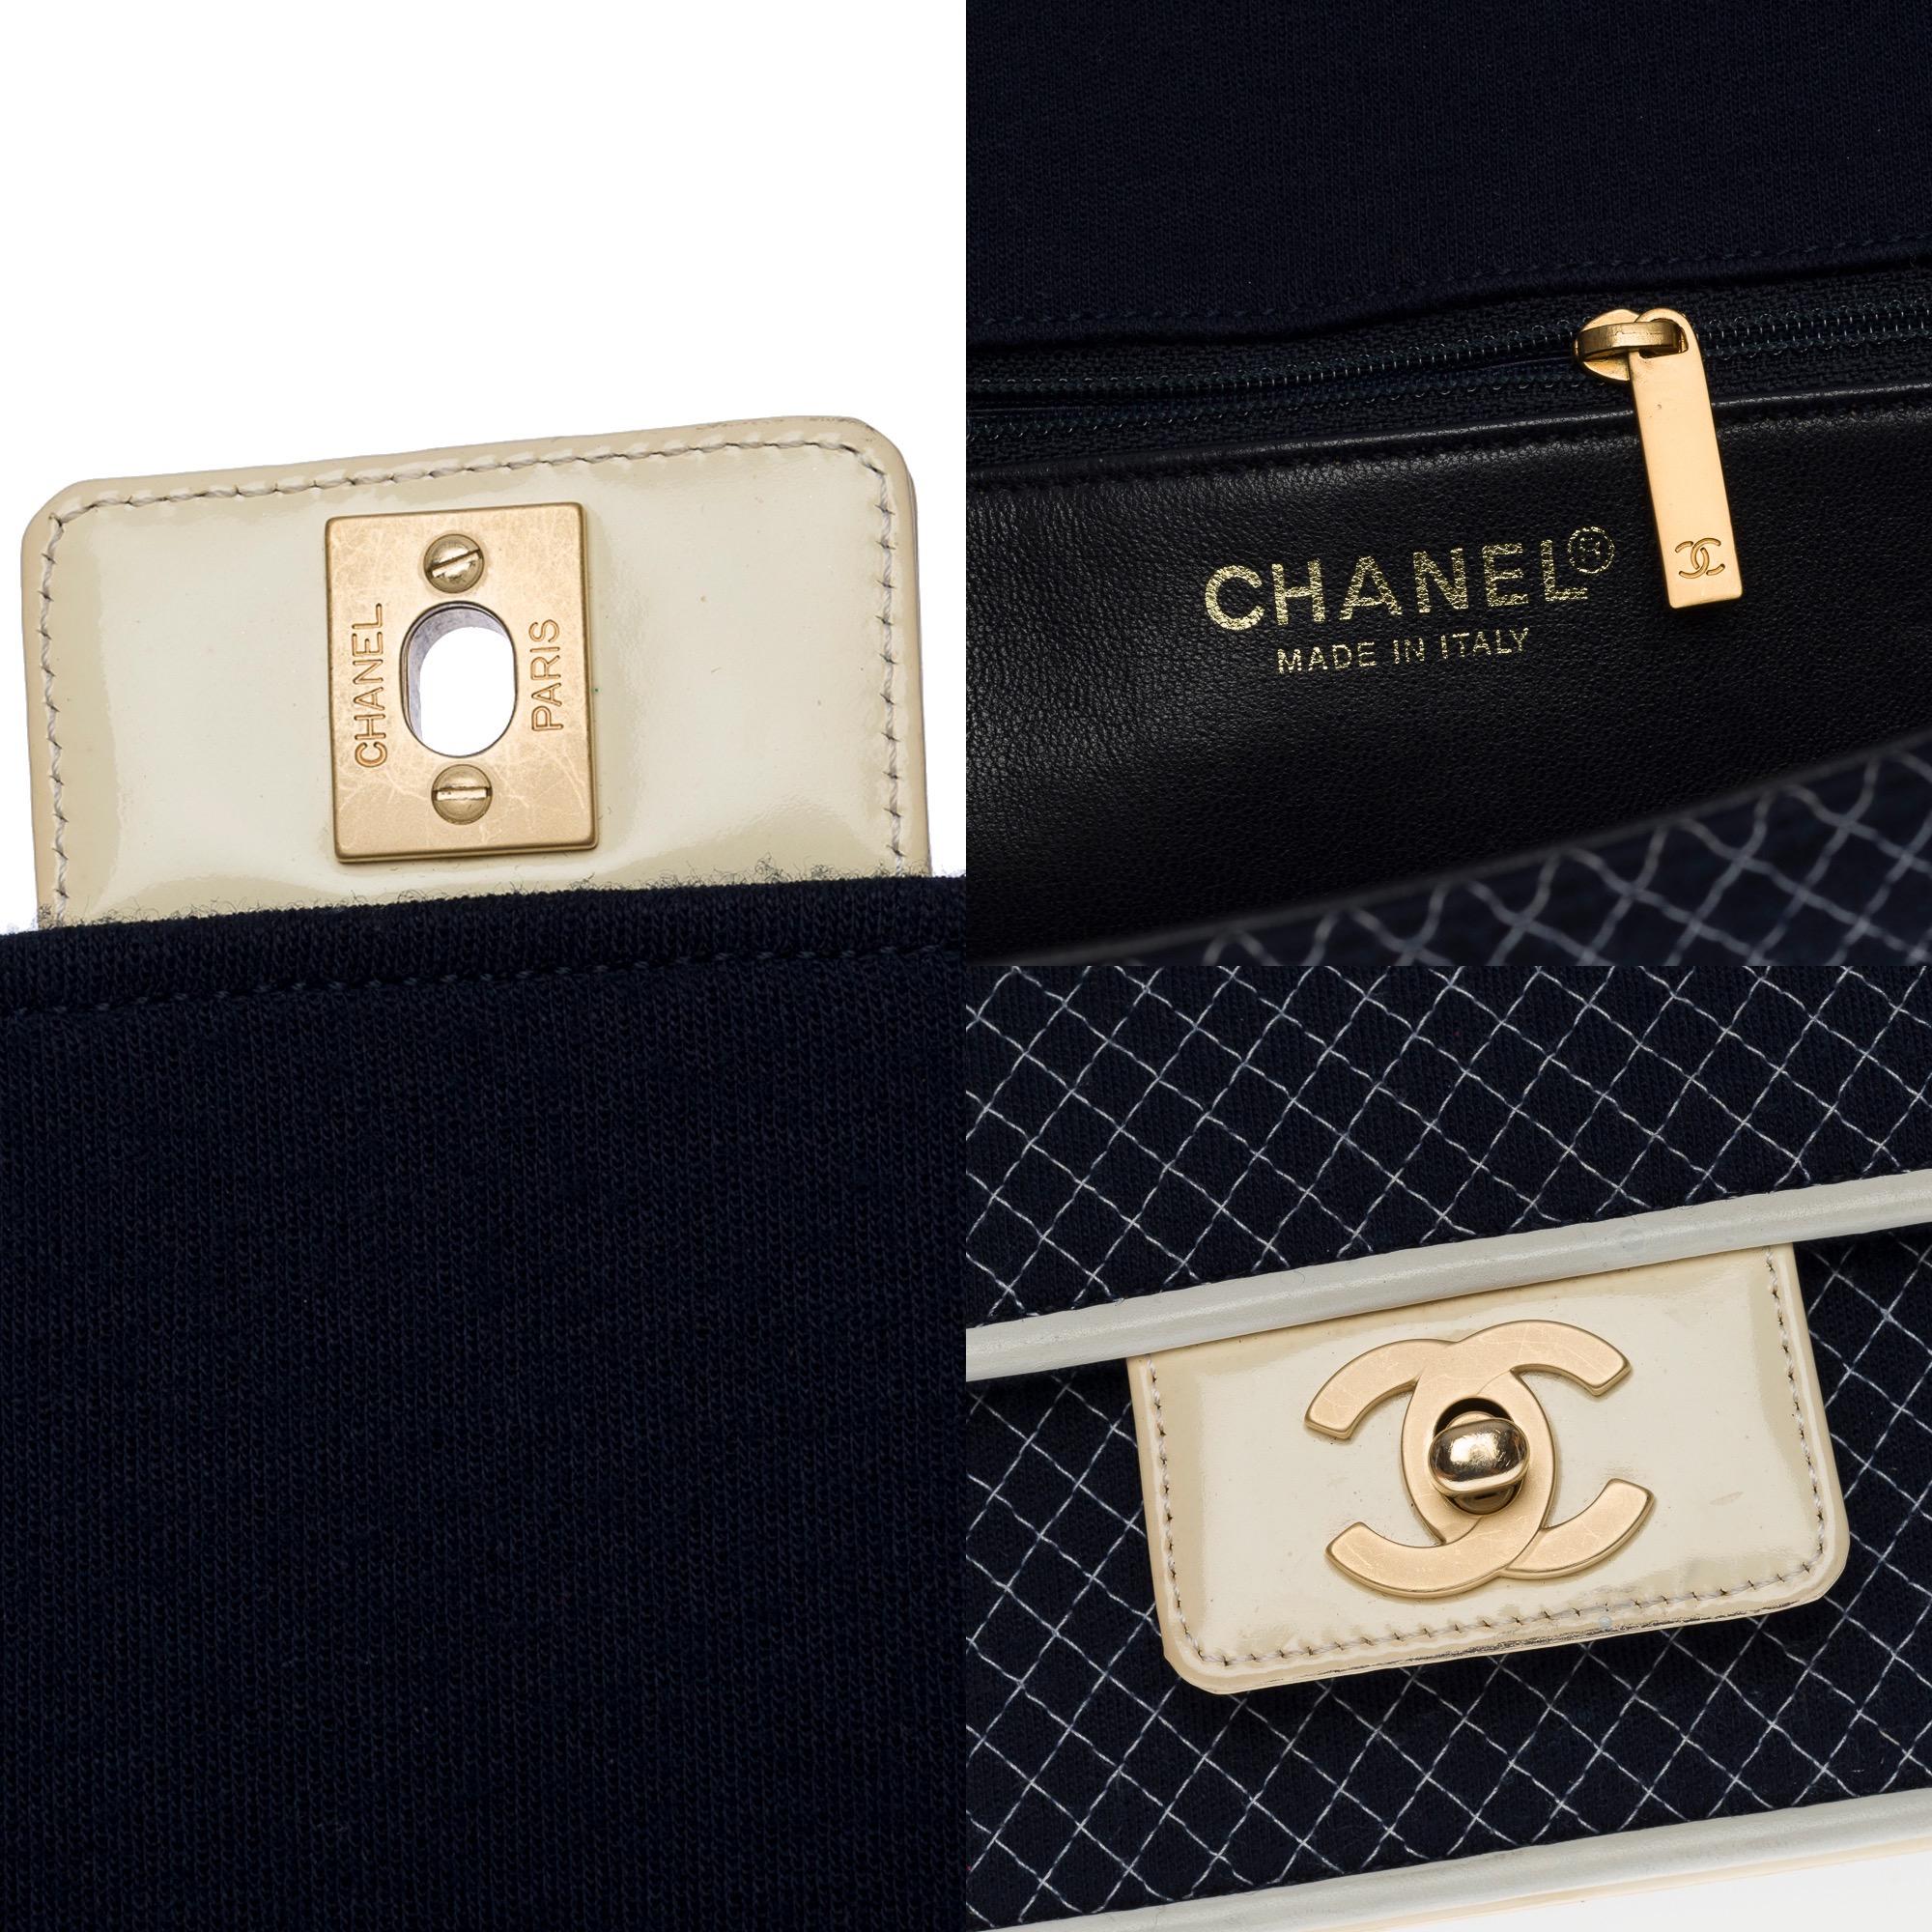 Chanel Timeless/Classic shoulder bag in navy blue jersey, GHW For Sale 1